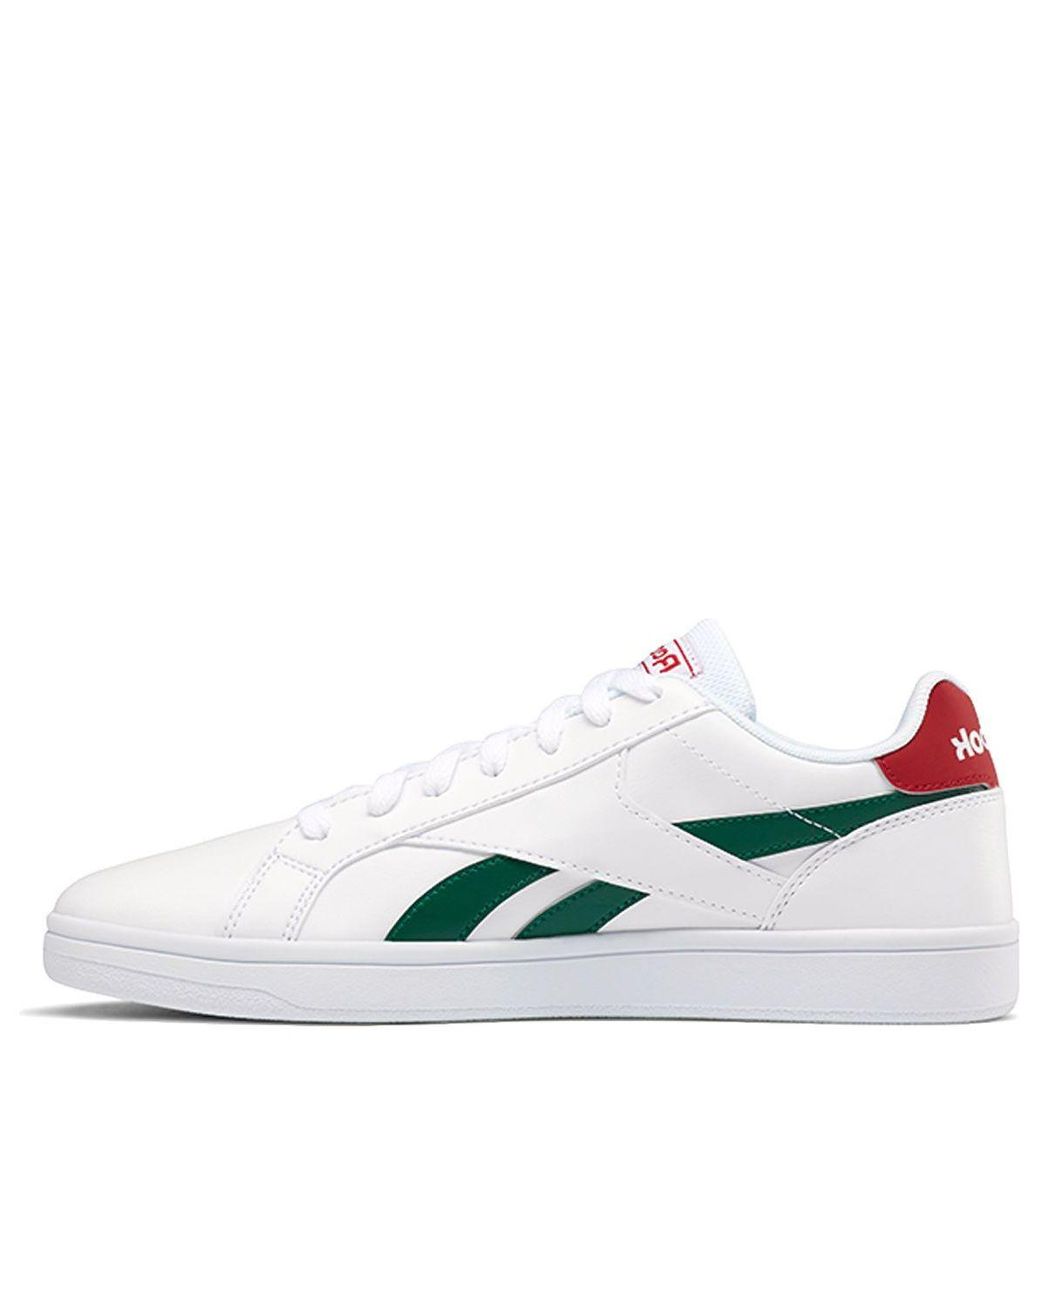 Reebok Royal Complete 2 Se Sneakers White/green/red | Lyst